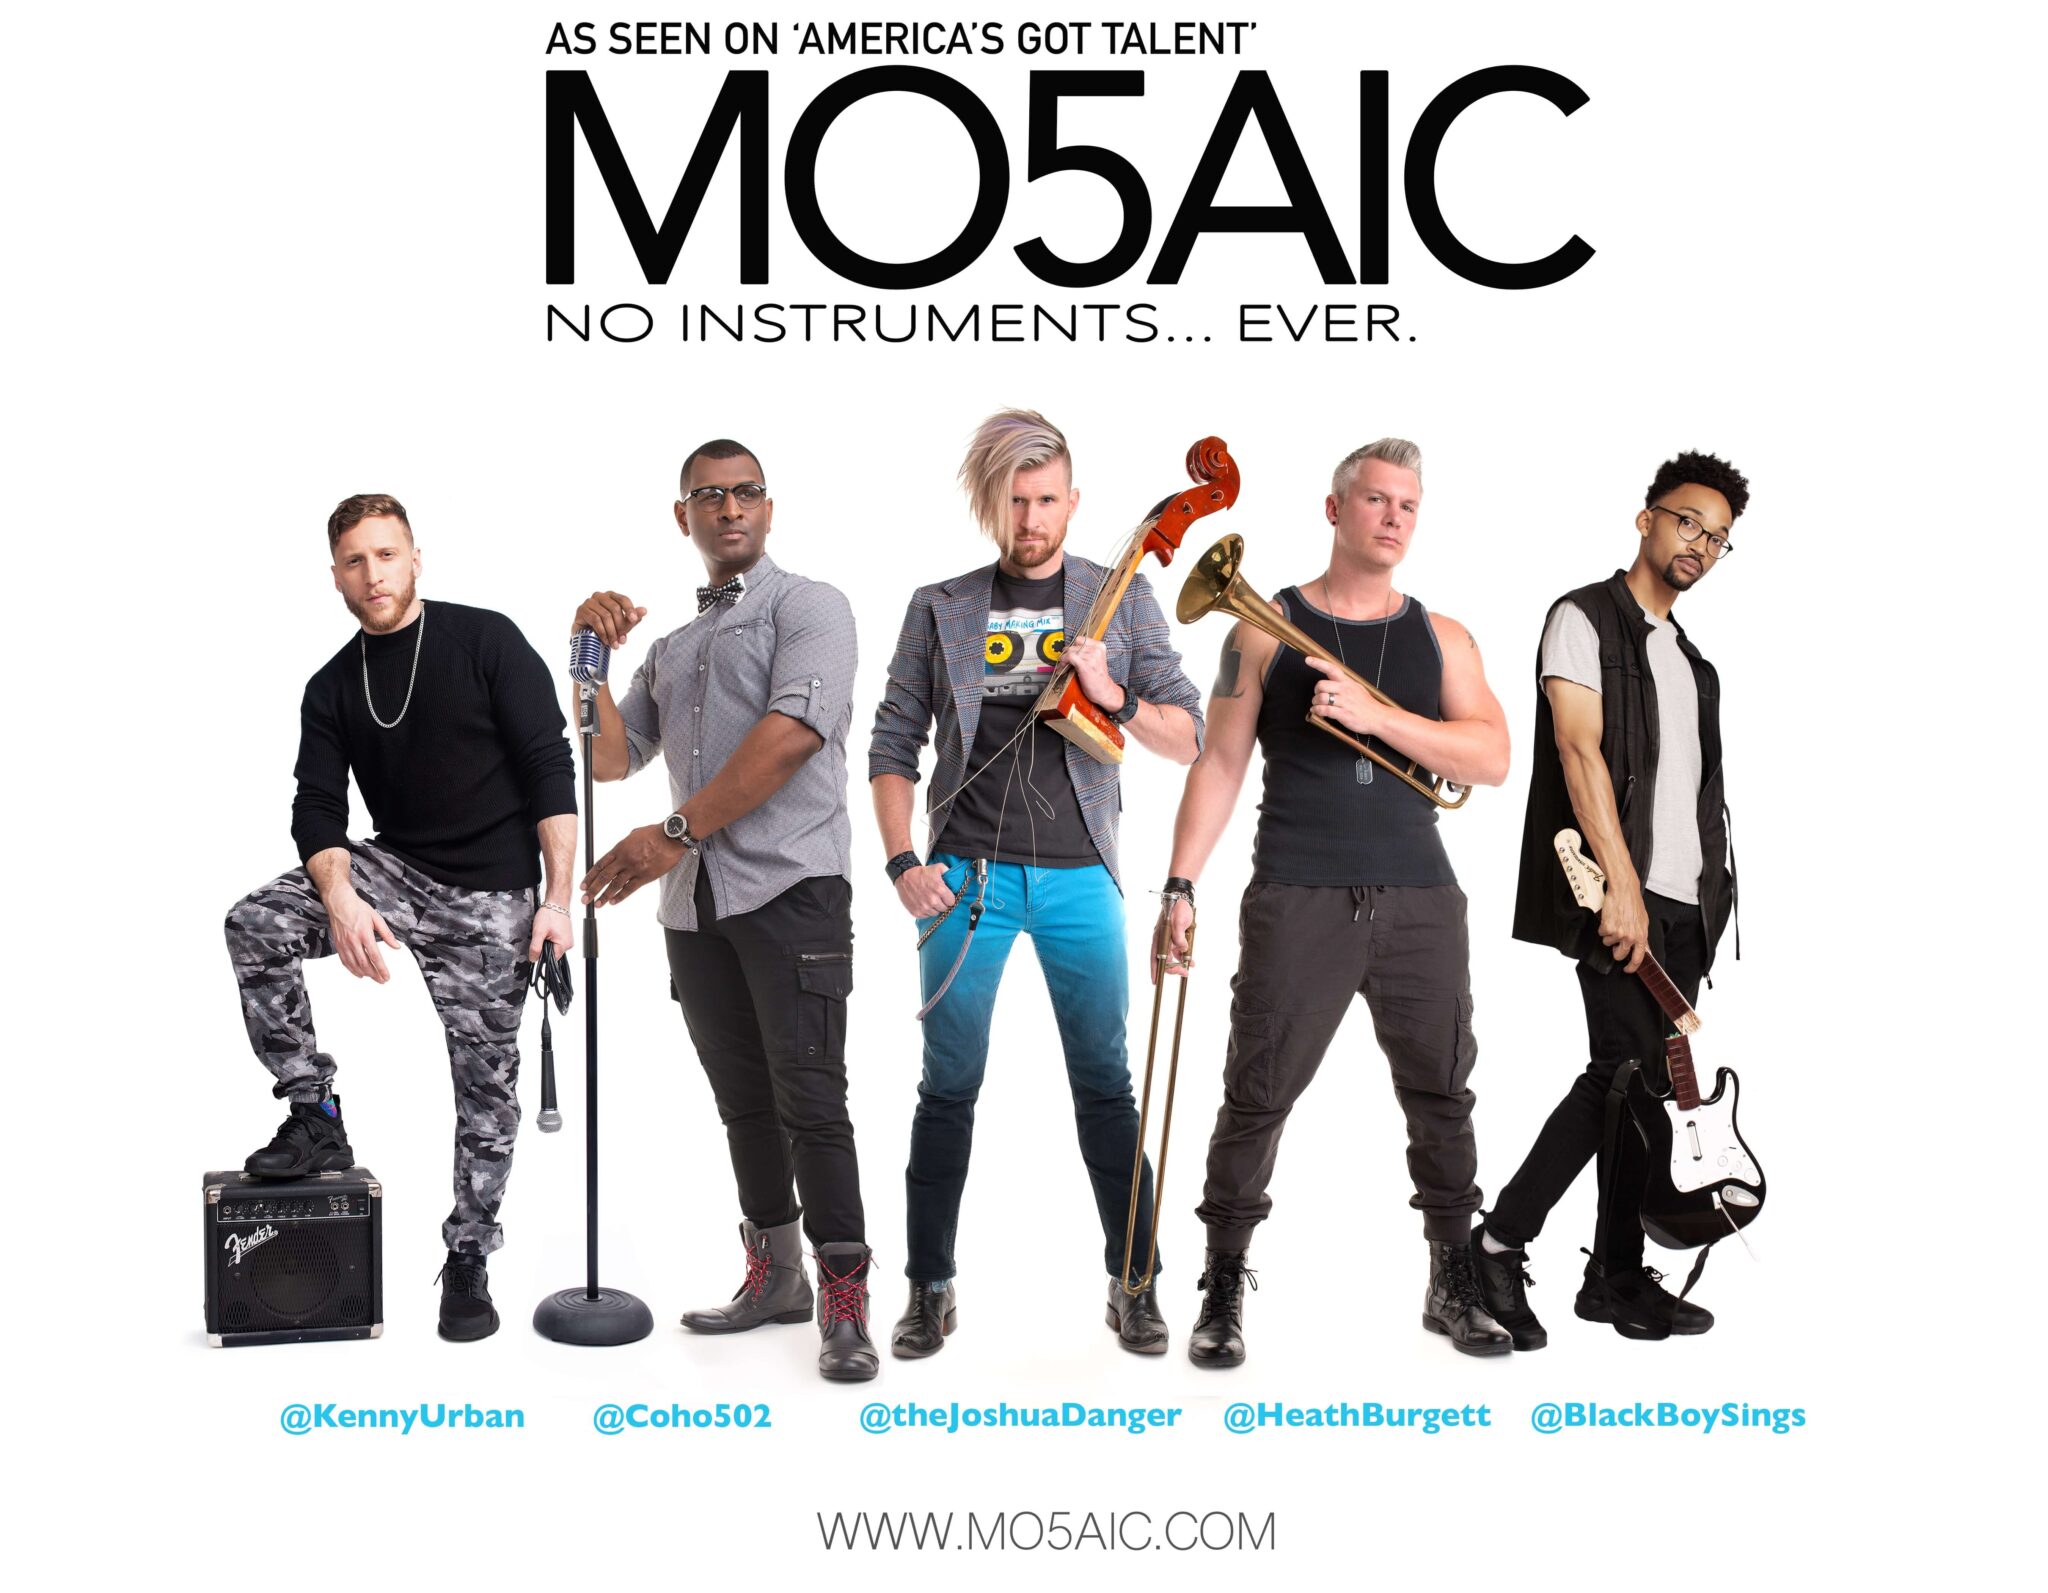 Mo5aic poster - Group of 5 musicians standing together